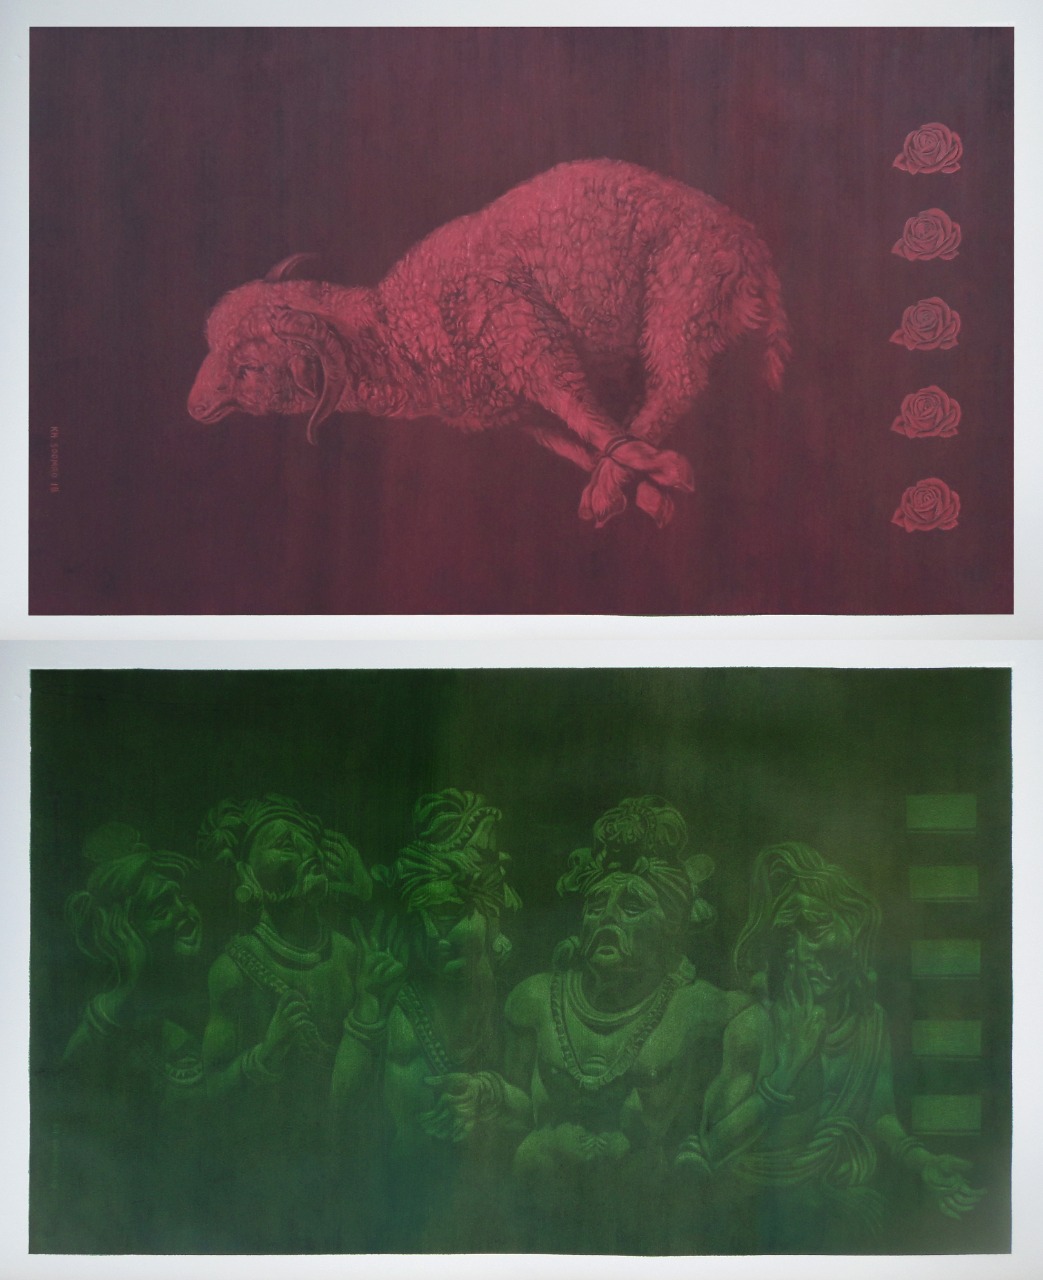 Khalid Soomro<br></br>Sacrifice (diptych)<br></br>Charcoal eraser drawing on montval sheet<br></br>30x30 inches